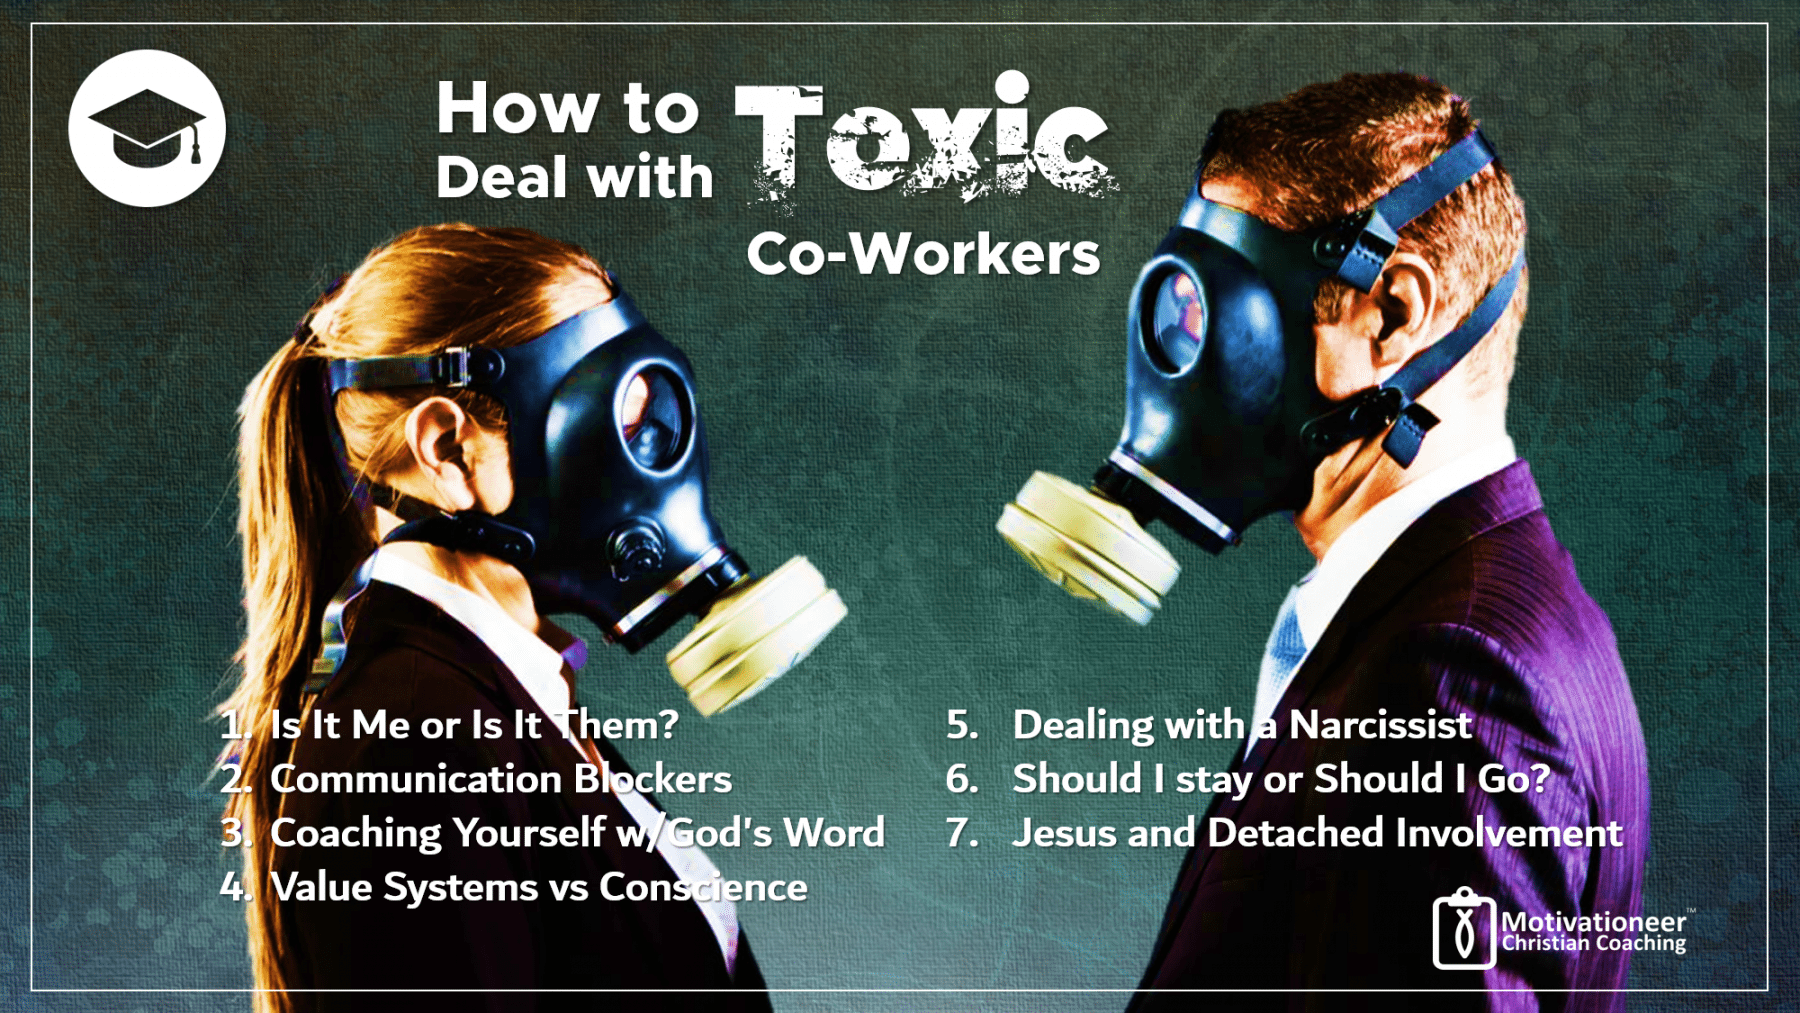 TRNG – How to Deal with Toxic Co-Workers